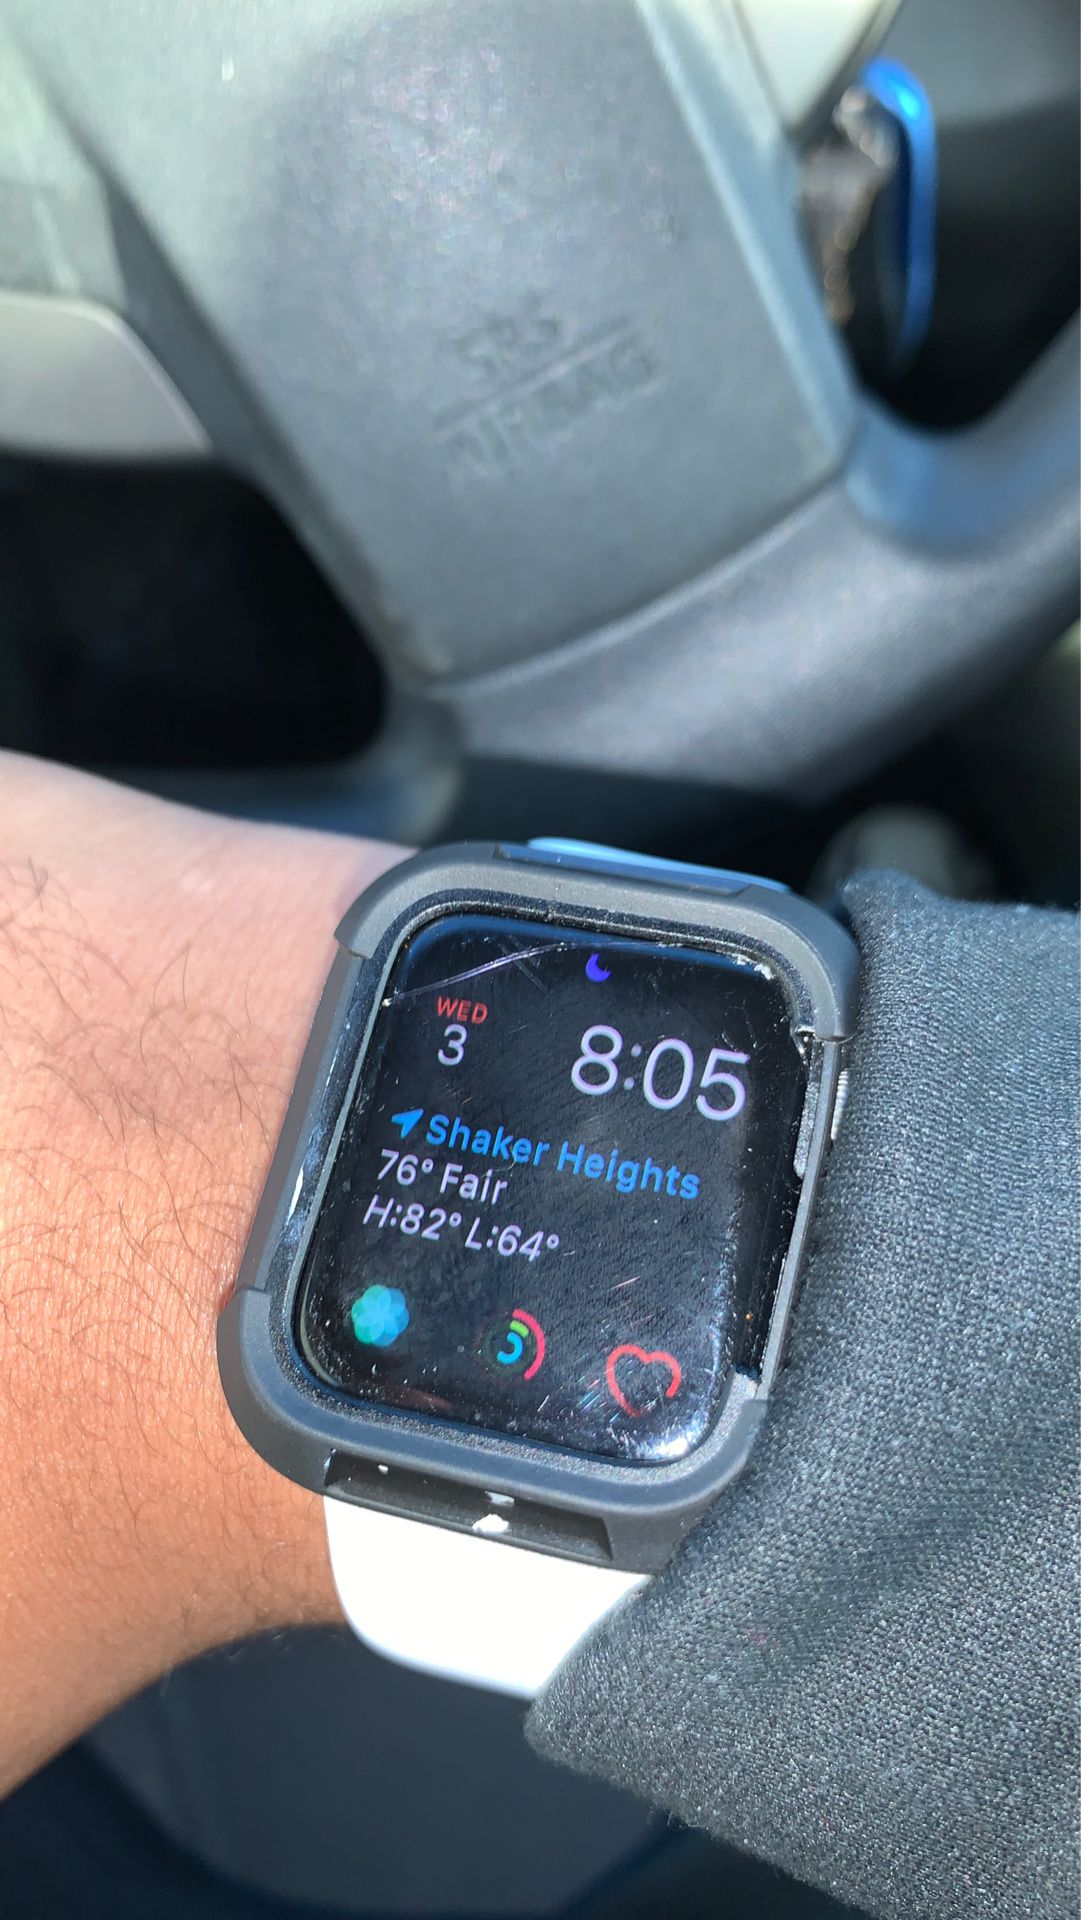 Apple Watch series 4 work good as new just don’t want it anymore